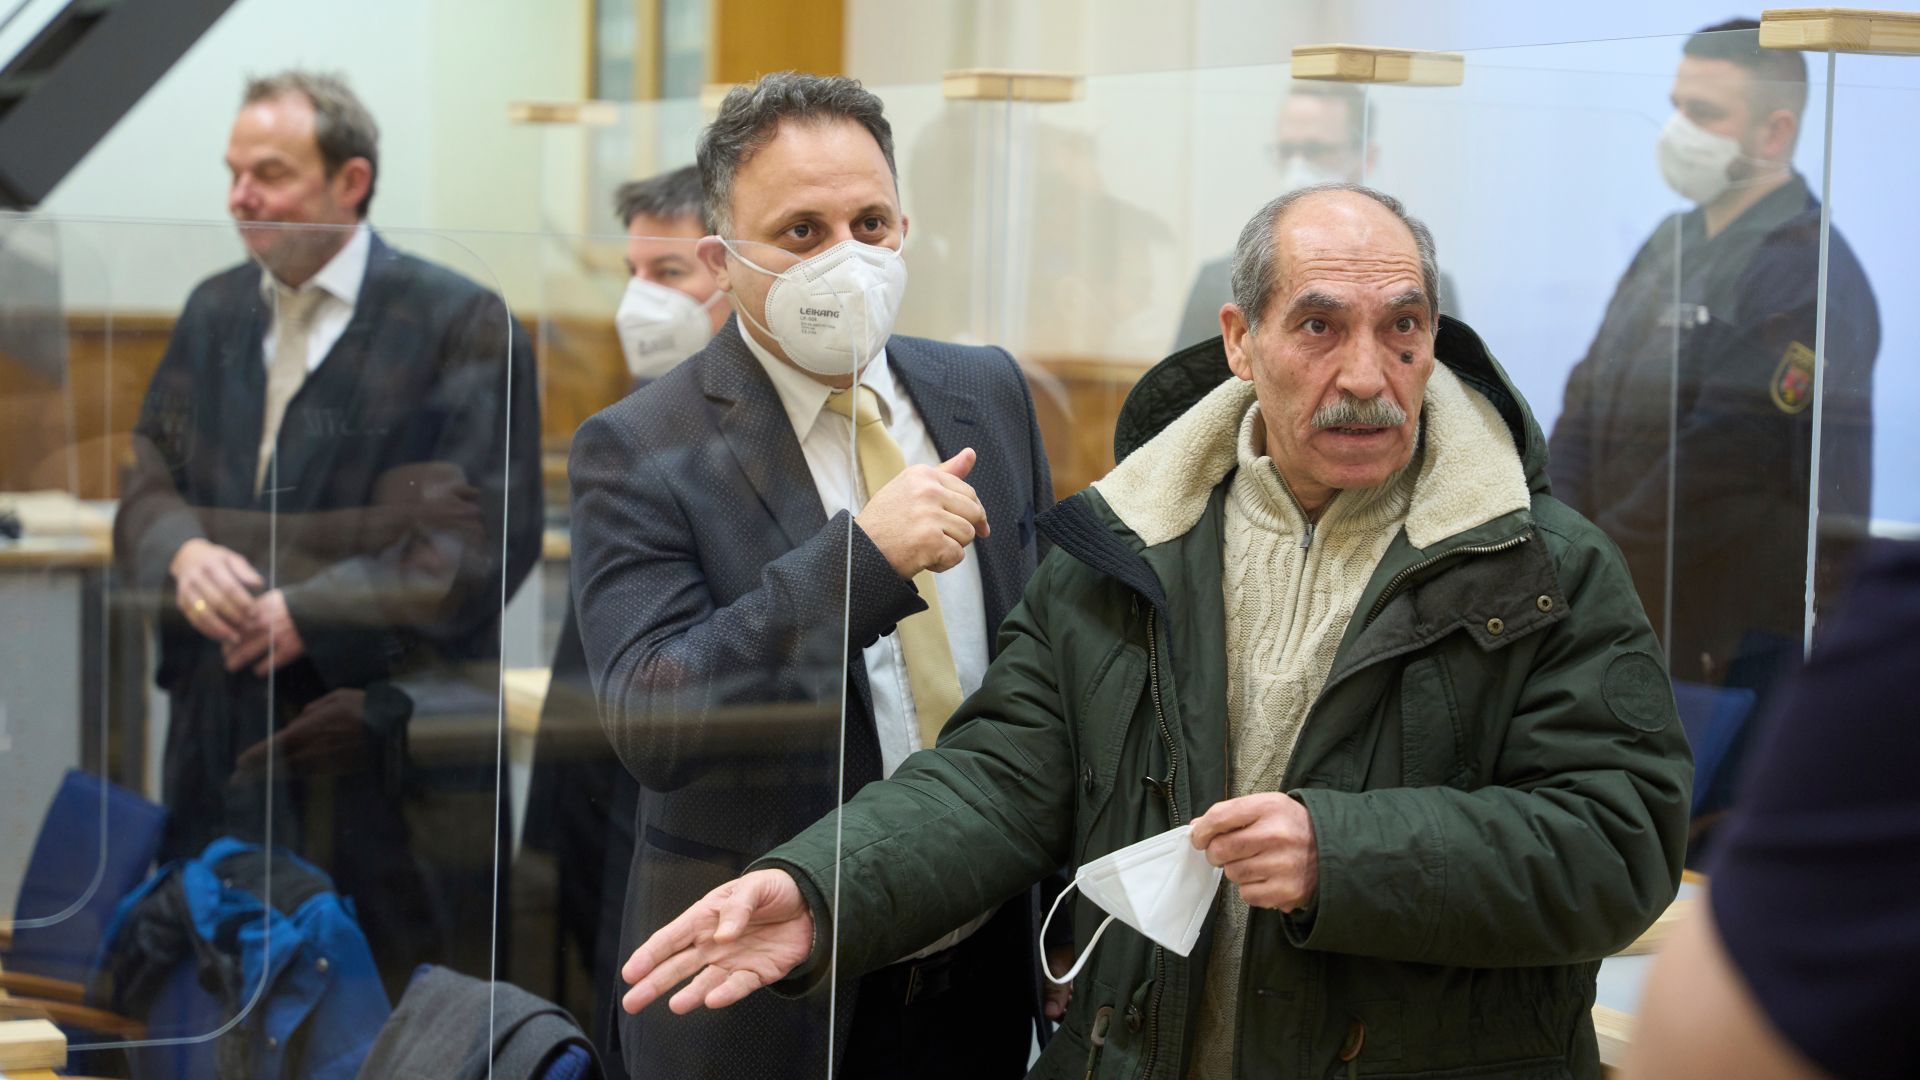 The defendant, Anwar Raslan, right, stands in the courtroom before the pronouncement of the verdict at the Higher Regional Court in Koblenz, Germany, Thursday, Jan. 13, 2022. A German court has convicted the former Syrian secret police officer of crimes against humanity for overseeing the abuse of detainees at a jail near Damascus a decade ago. The verdict Thursday in the landmark trial has been keenly anticipated by Syrians who suffered abuse or lost relatives in the country's long-running conflict. (Thomas Frey/Pool via AP)